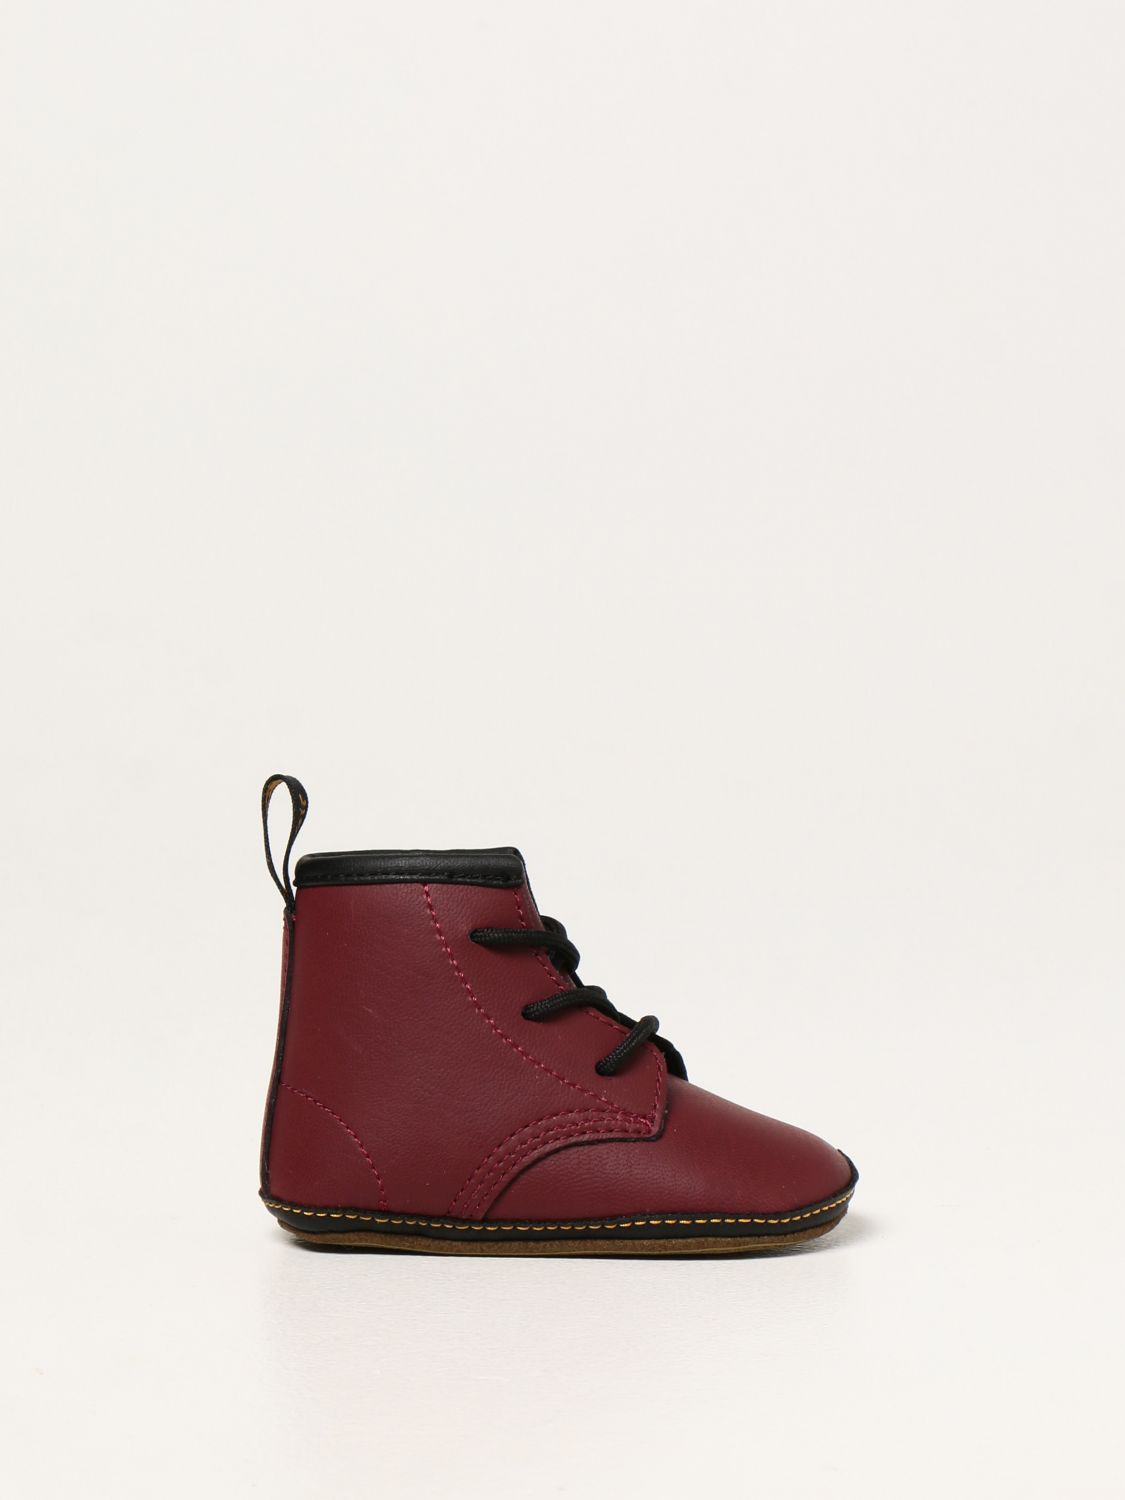 Shoes Dr. Martens: Dr. Martens 1460 shoe in rubberized leather burgundy 1